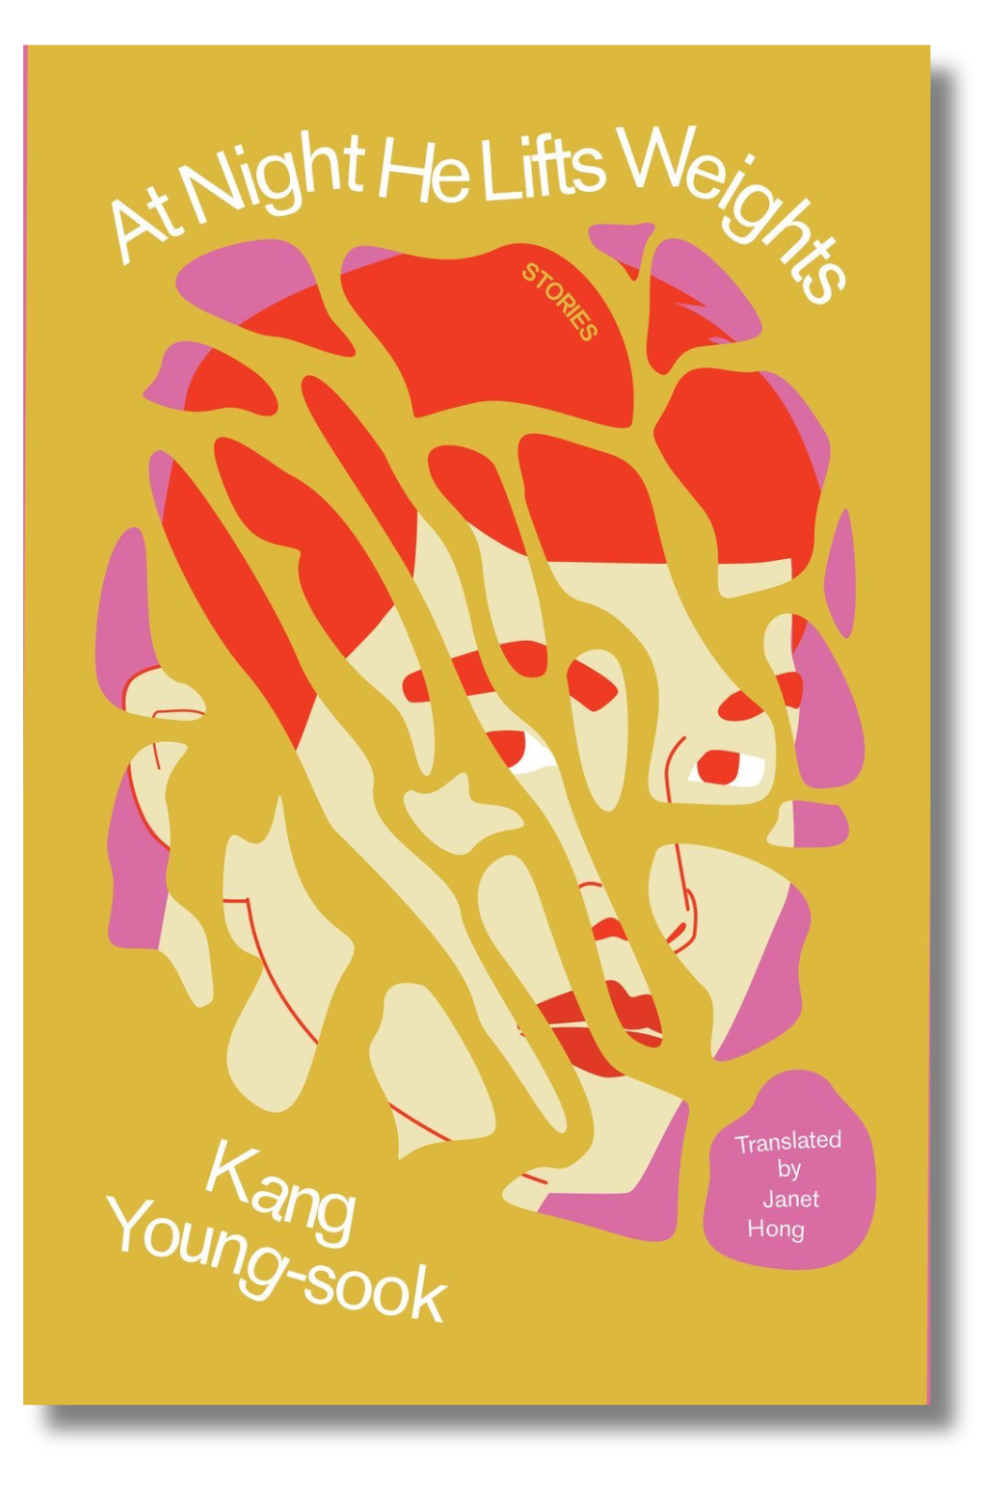 The cover of "At Night He Lifts Weights" by Kang Young-sook, tr. by Janet Hong